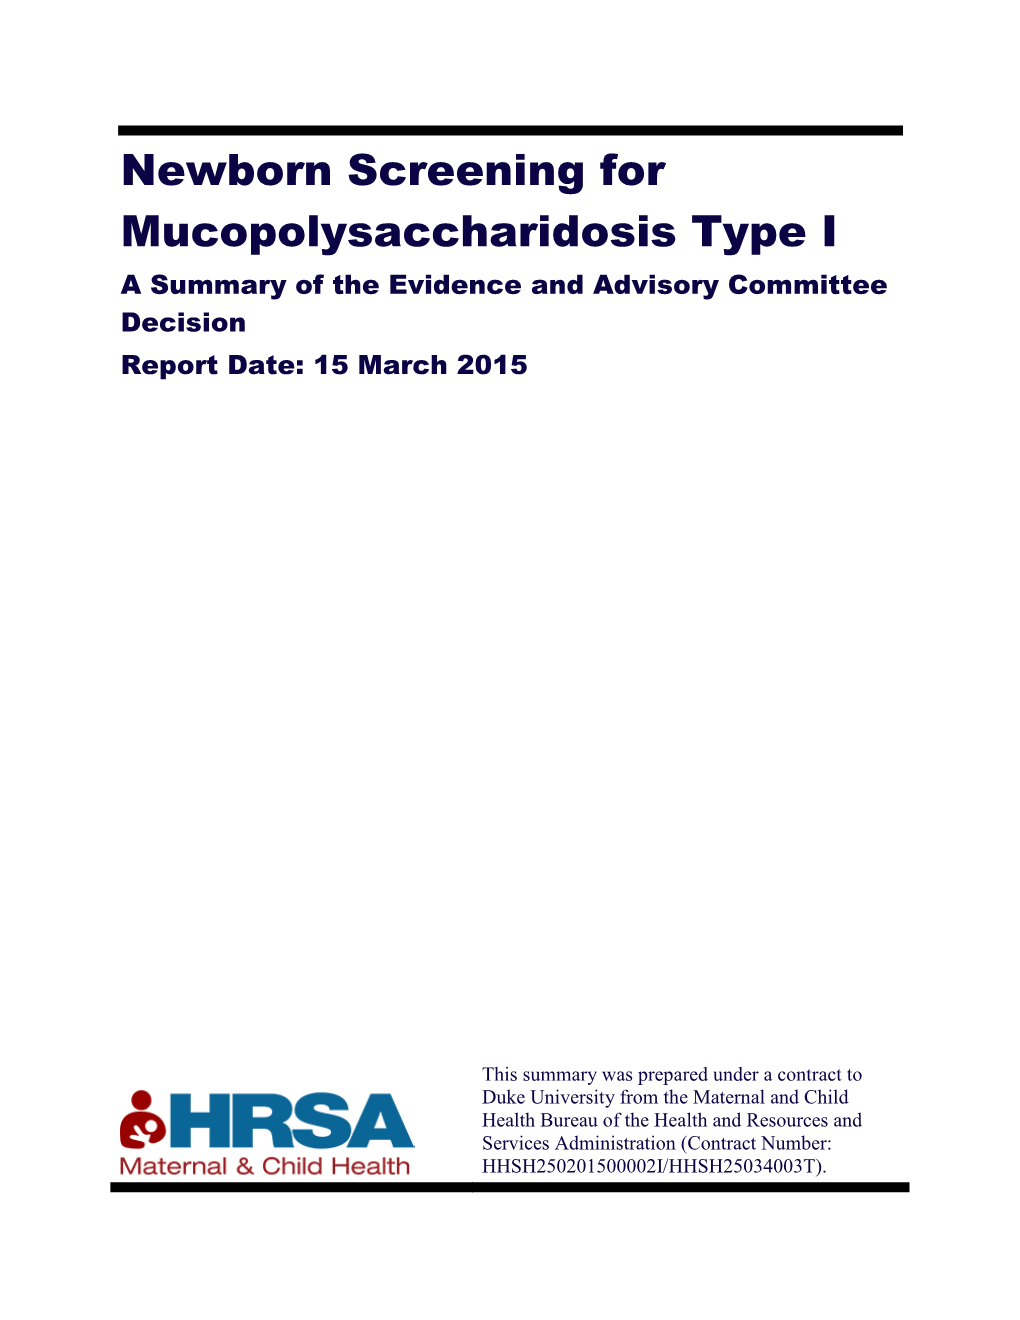 Newborn Screening for MPS I Can Happen Along with Routine Newborn Screening for Other Conditions During the First Few Days of Life